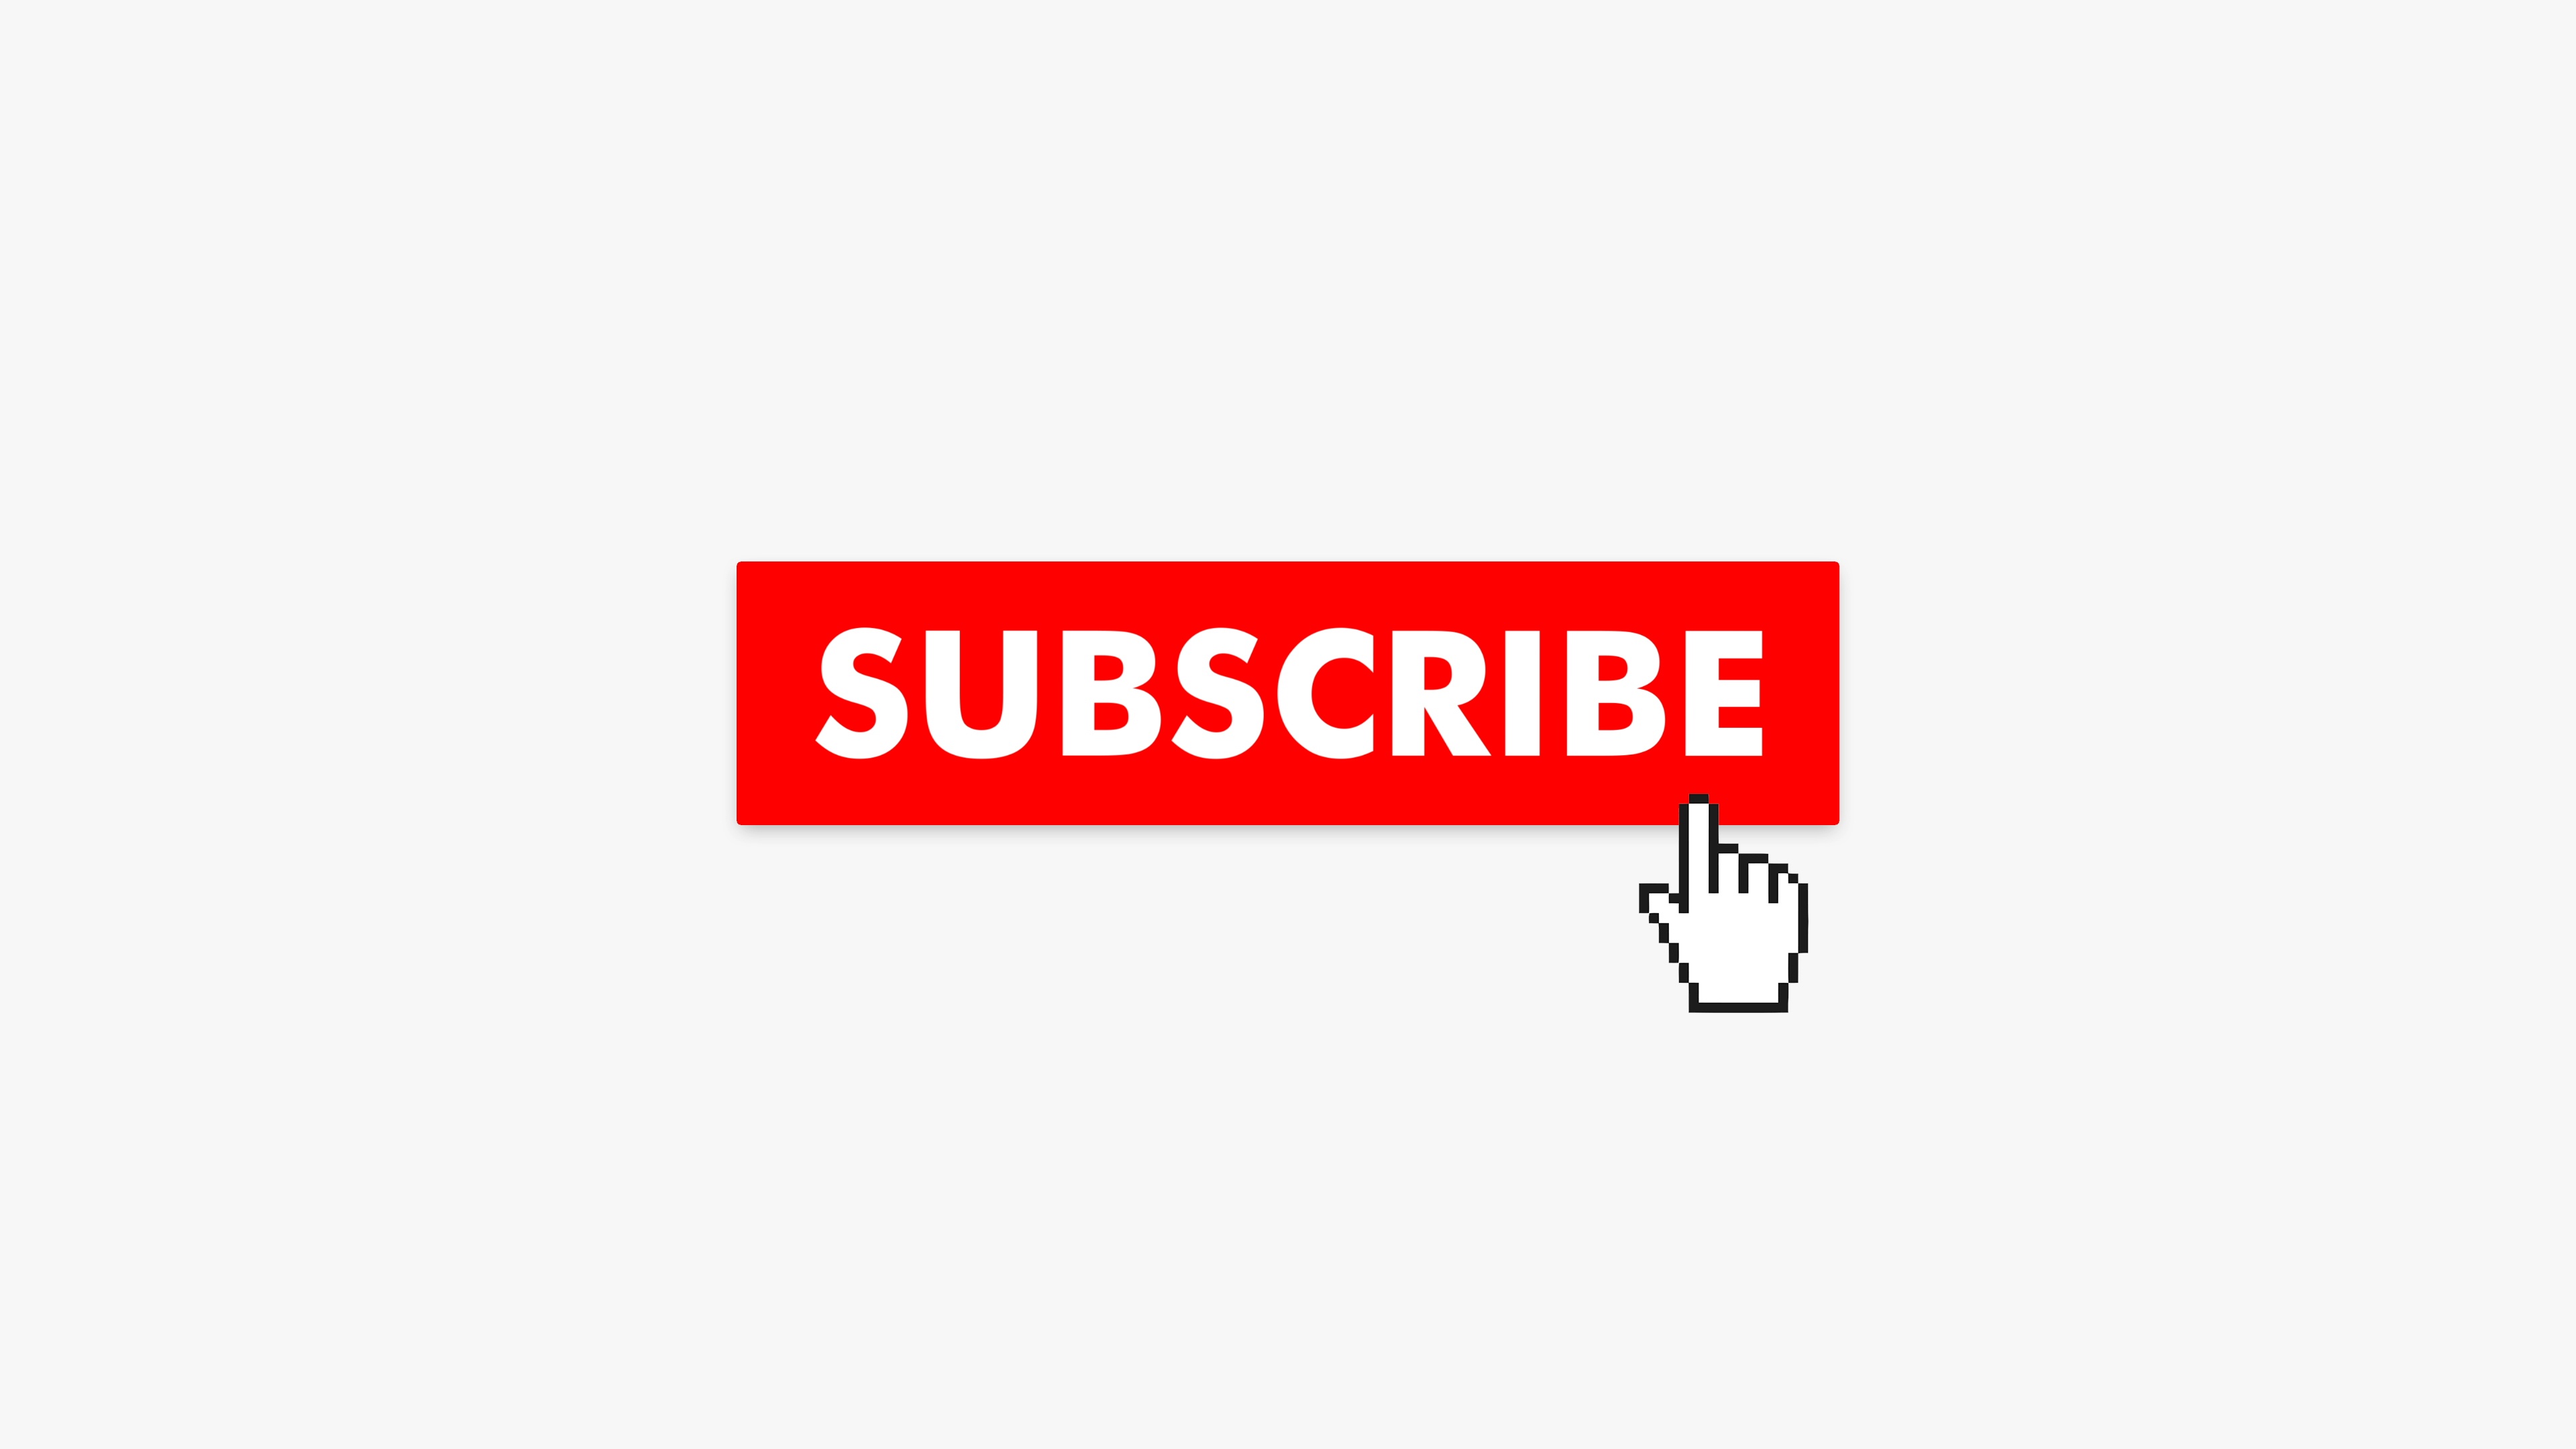 Animated Youtube Subscribe Button Template